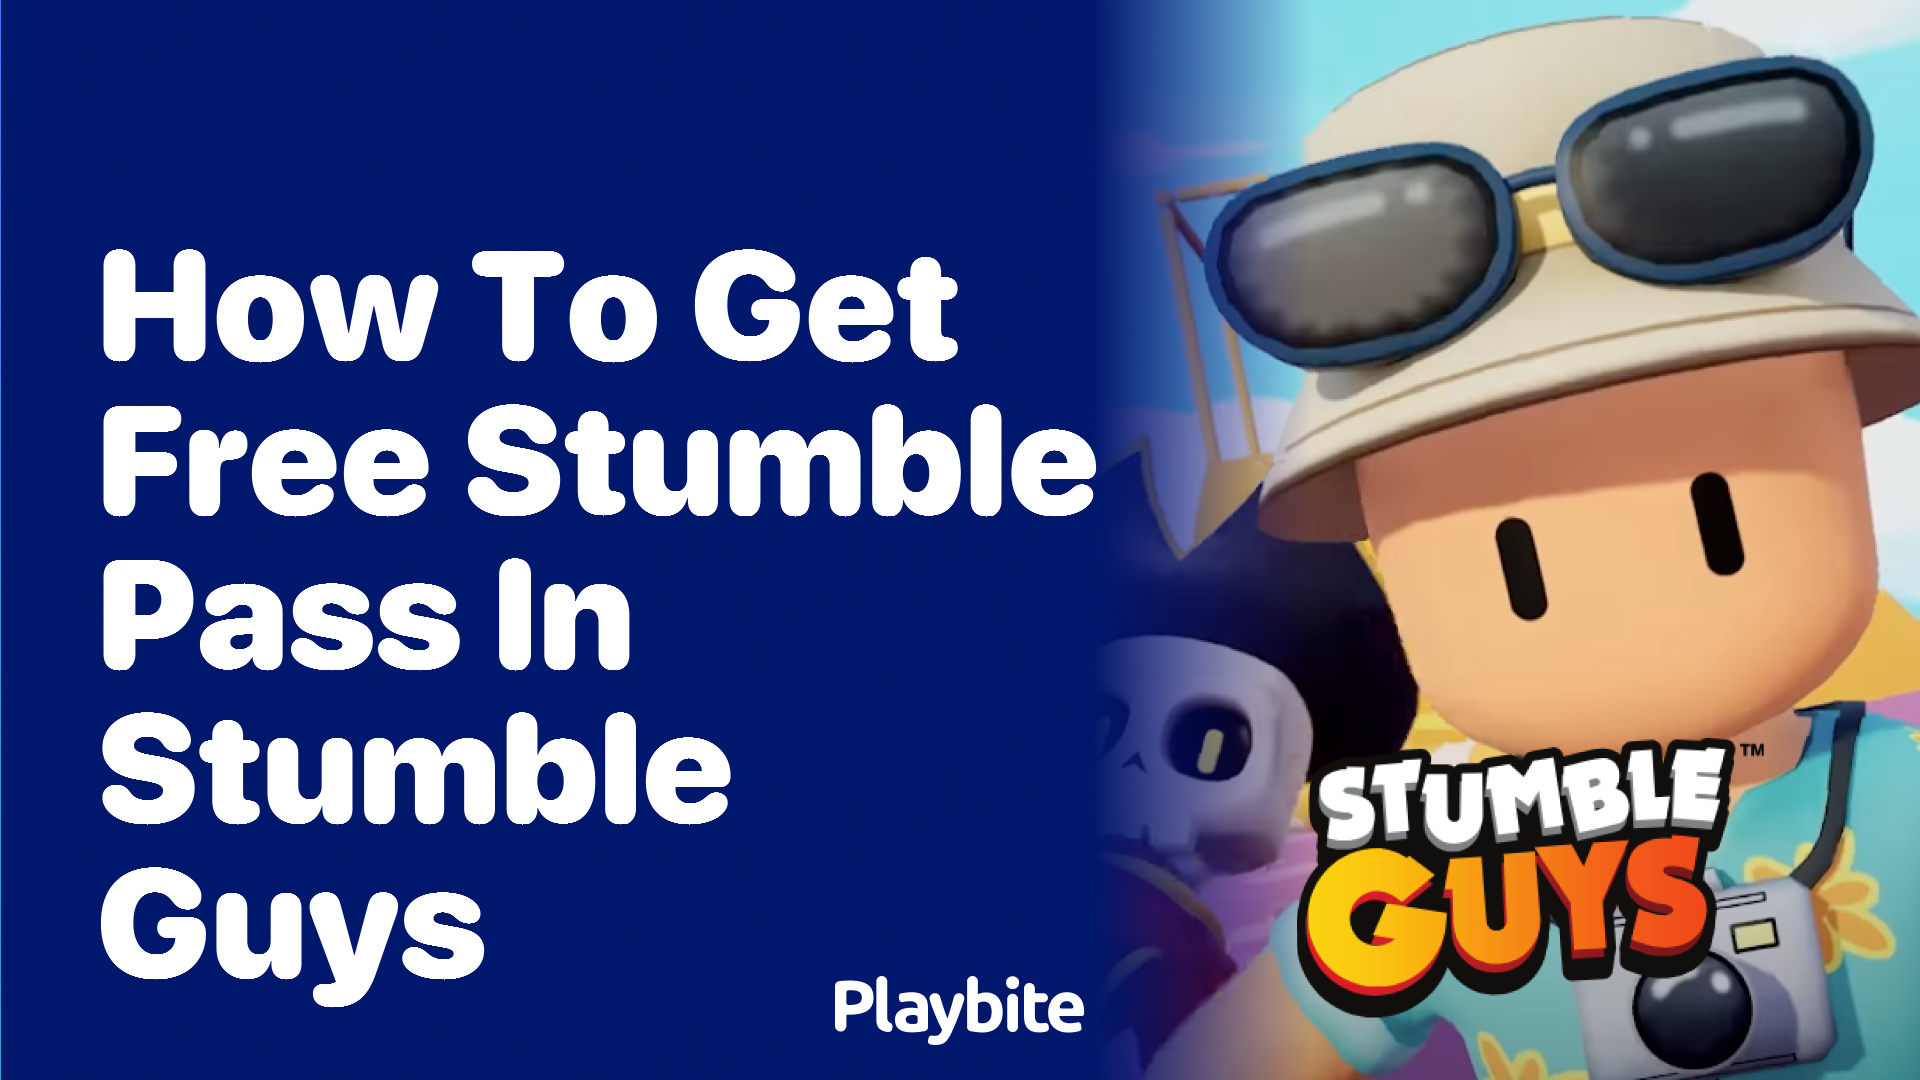 How to Get a Free Stumble Pass in Stumble Guys